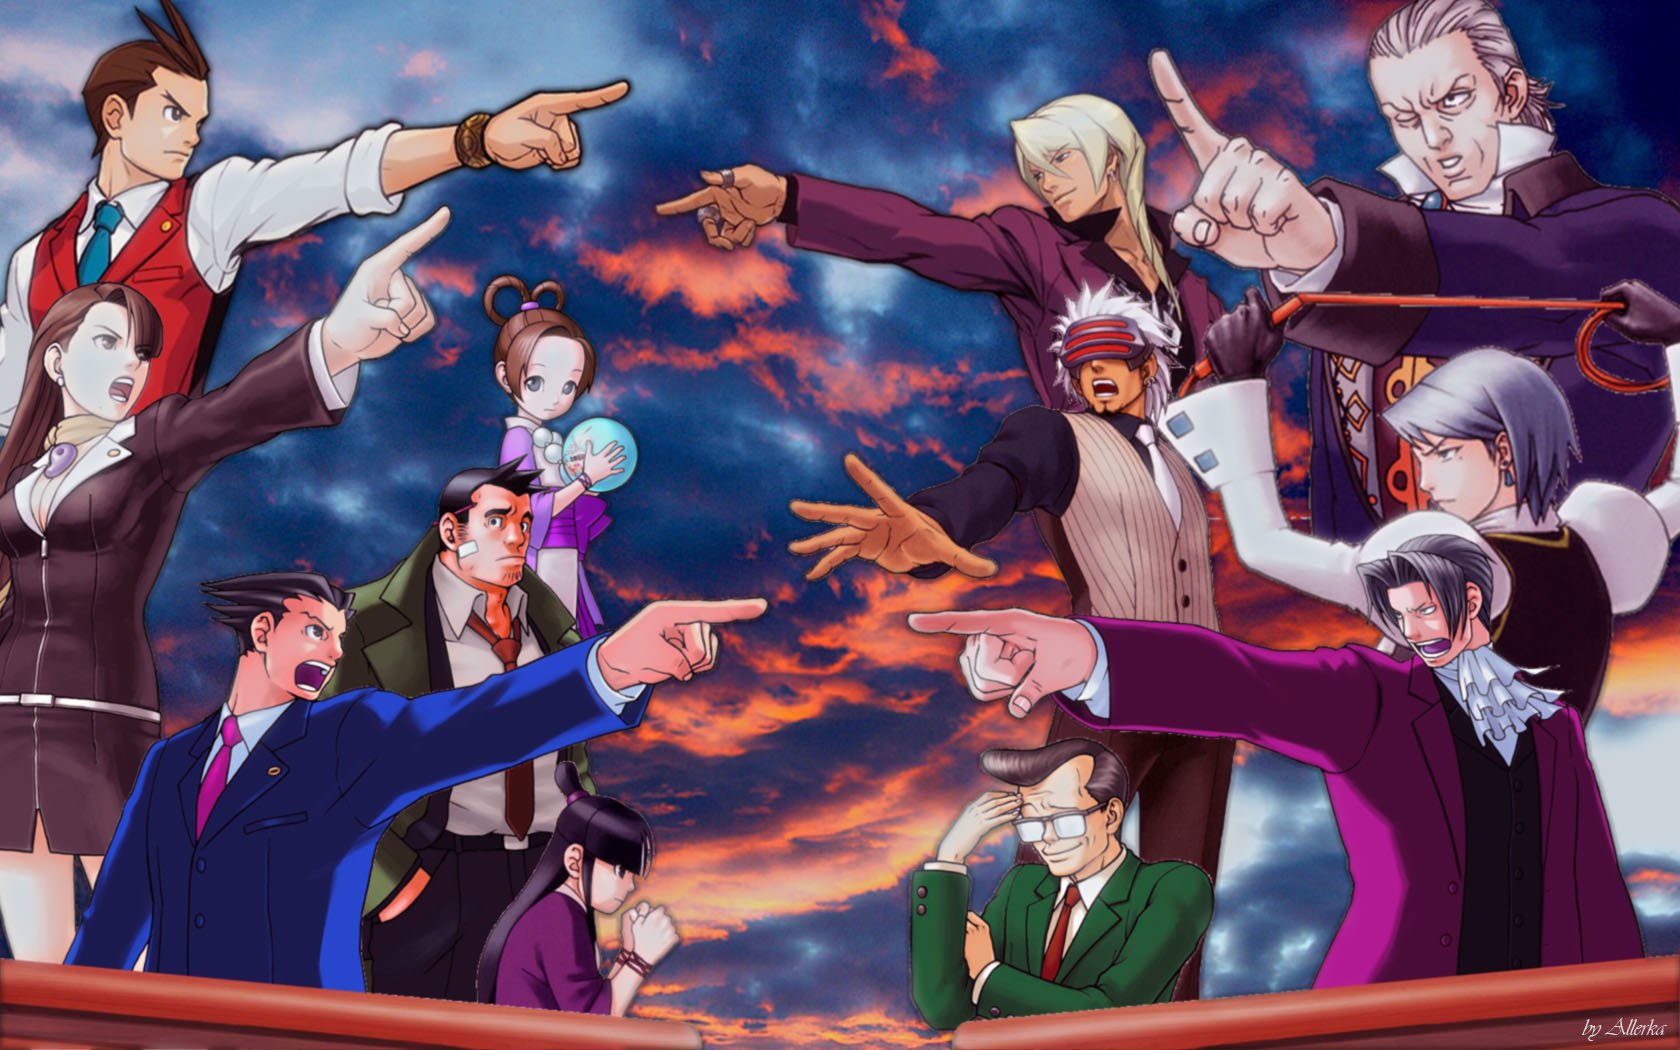 Phoenix Wright: Ace Attorney Wallpapers